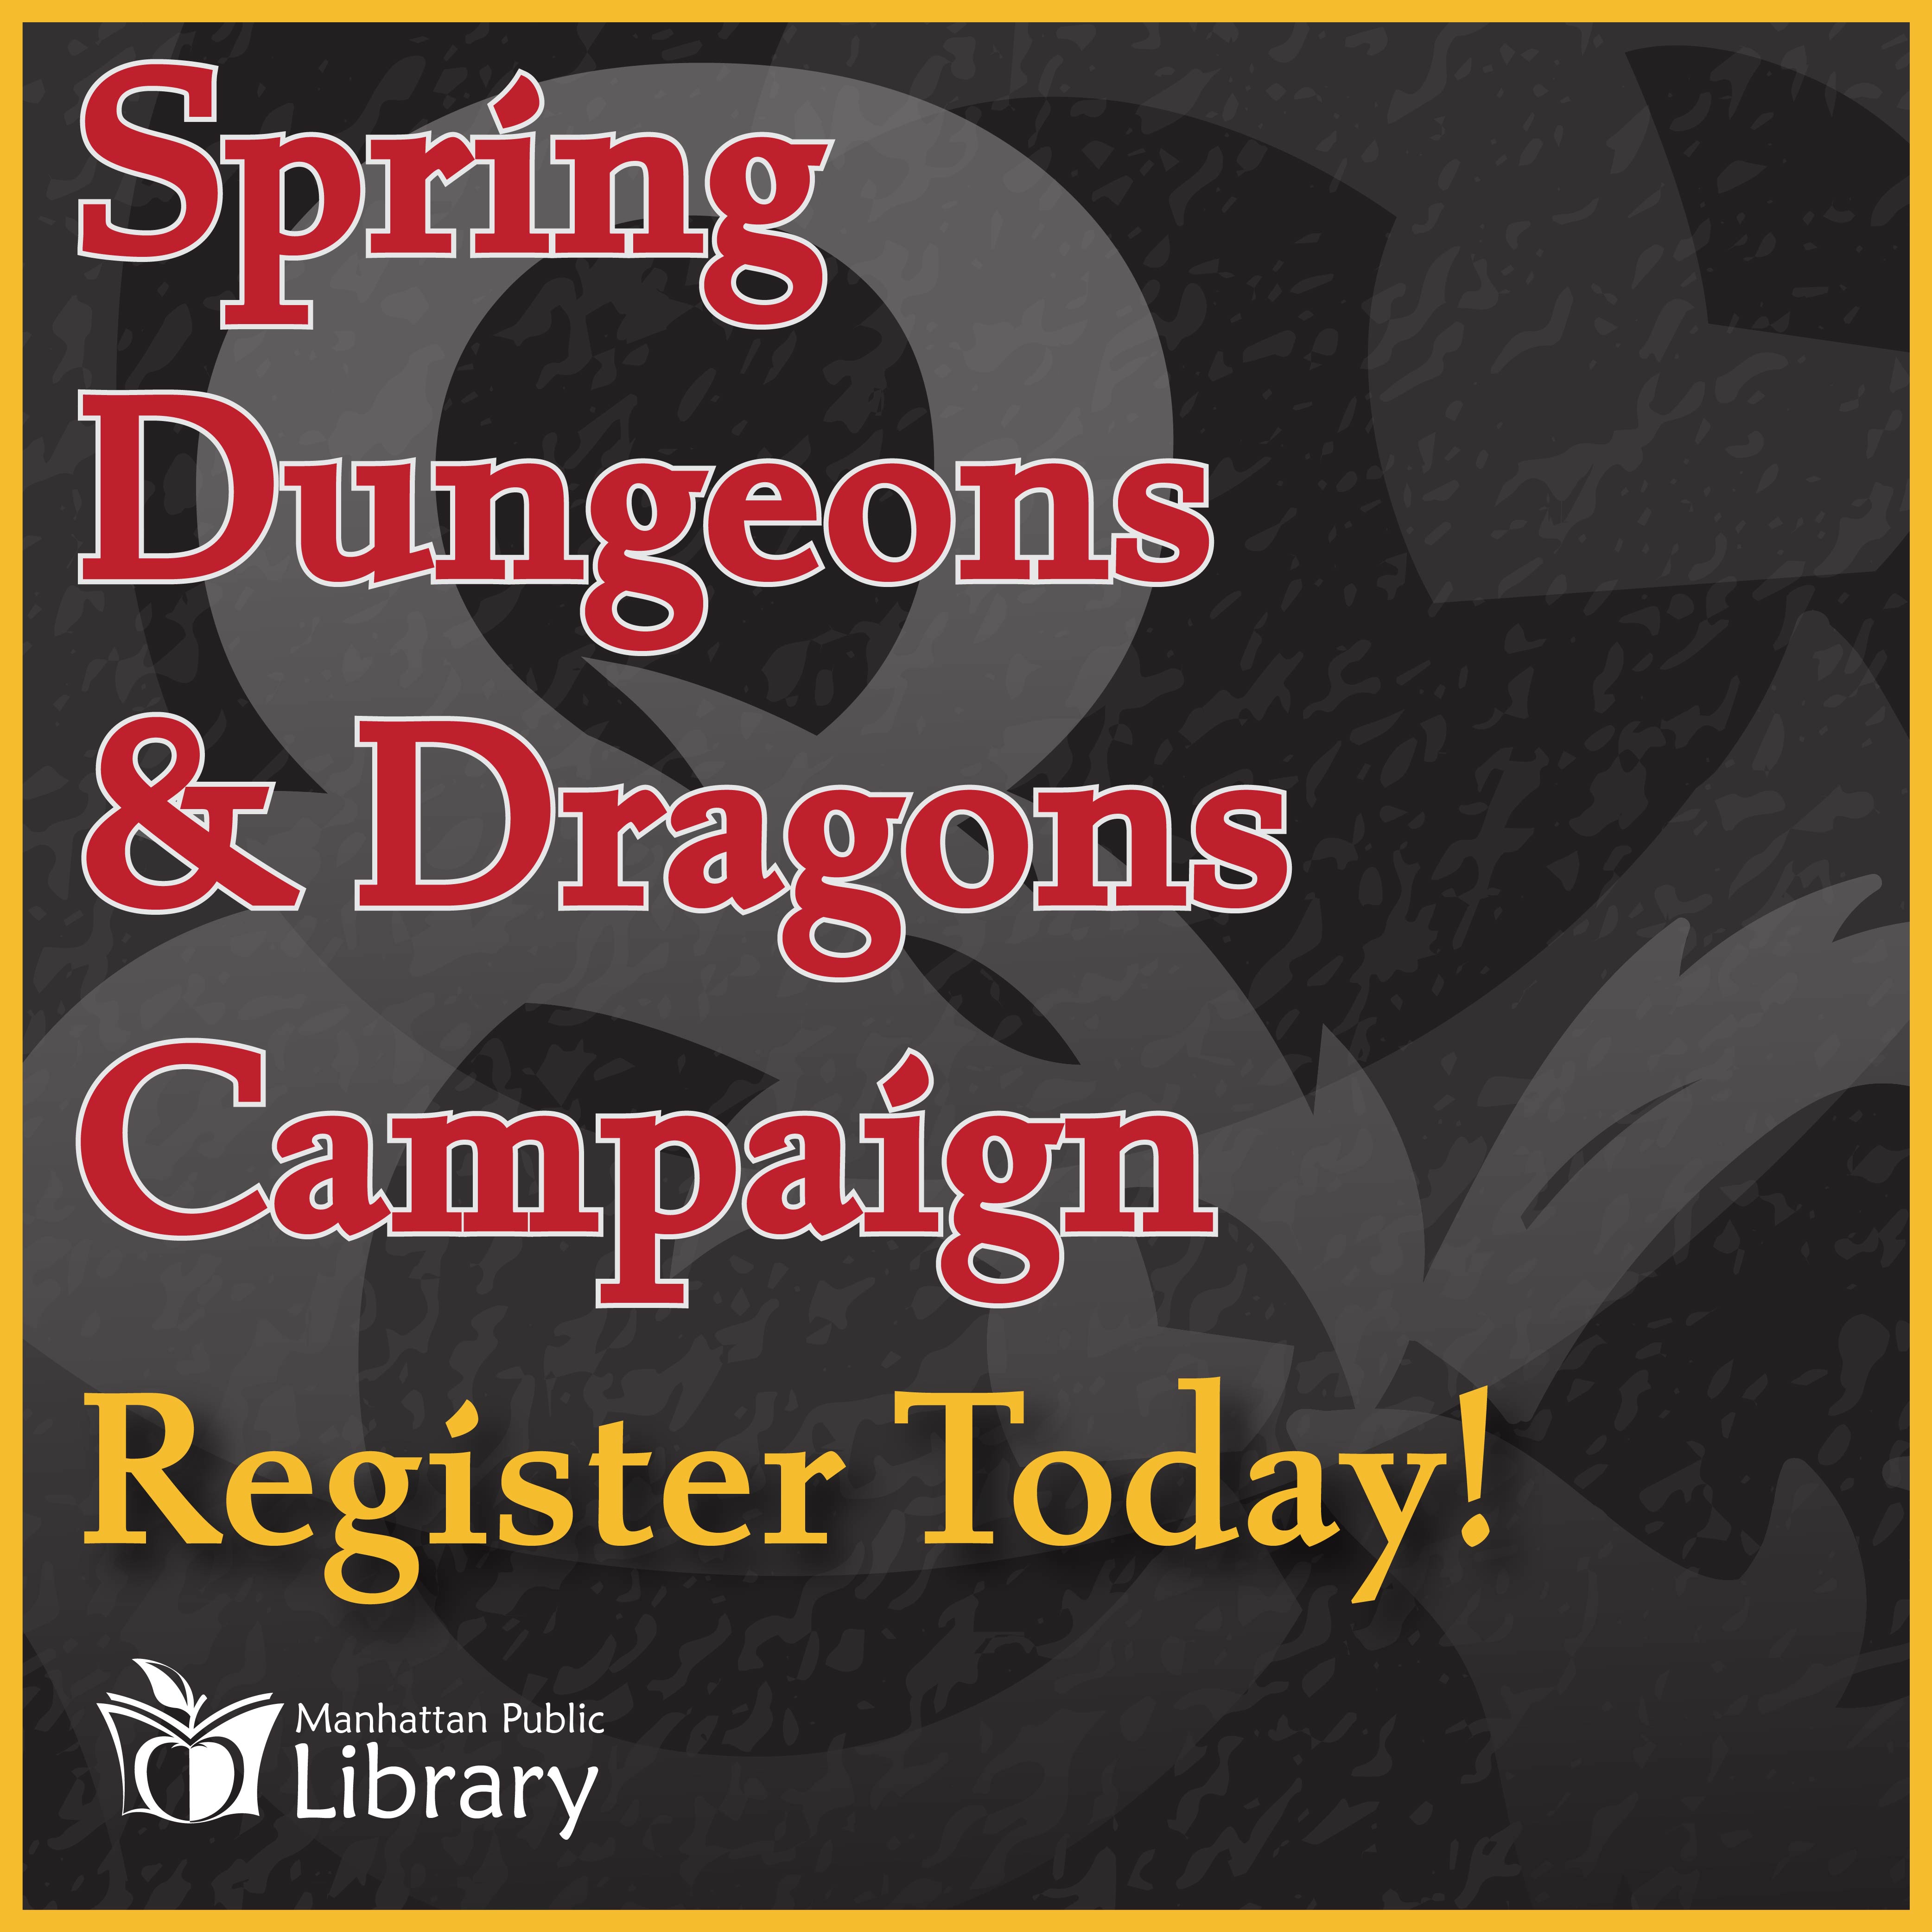 Spring Dungeons & Dragons Campaign: Register Today!